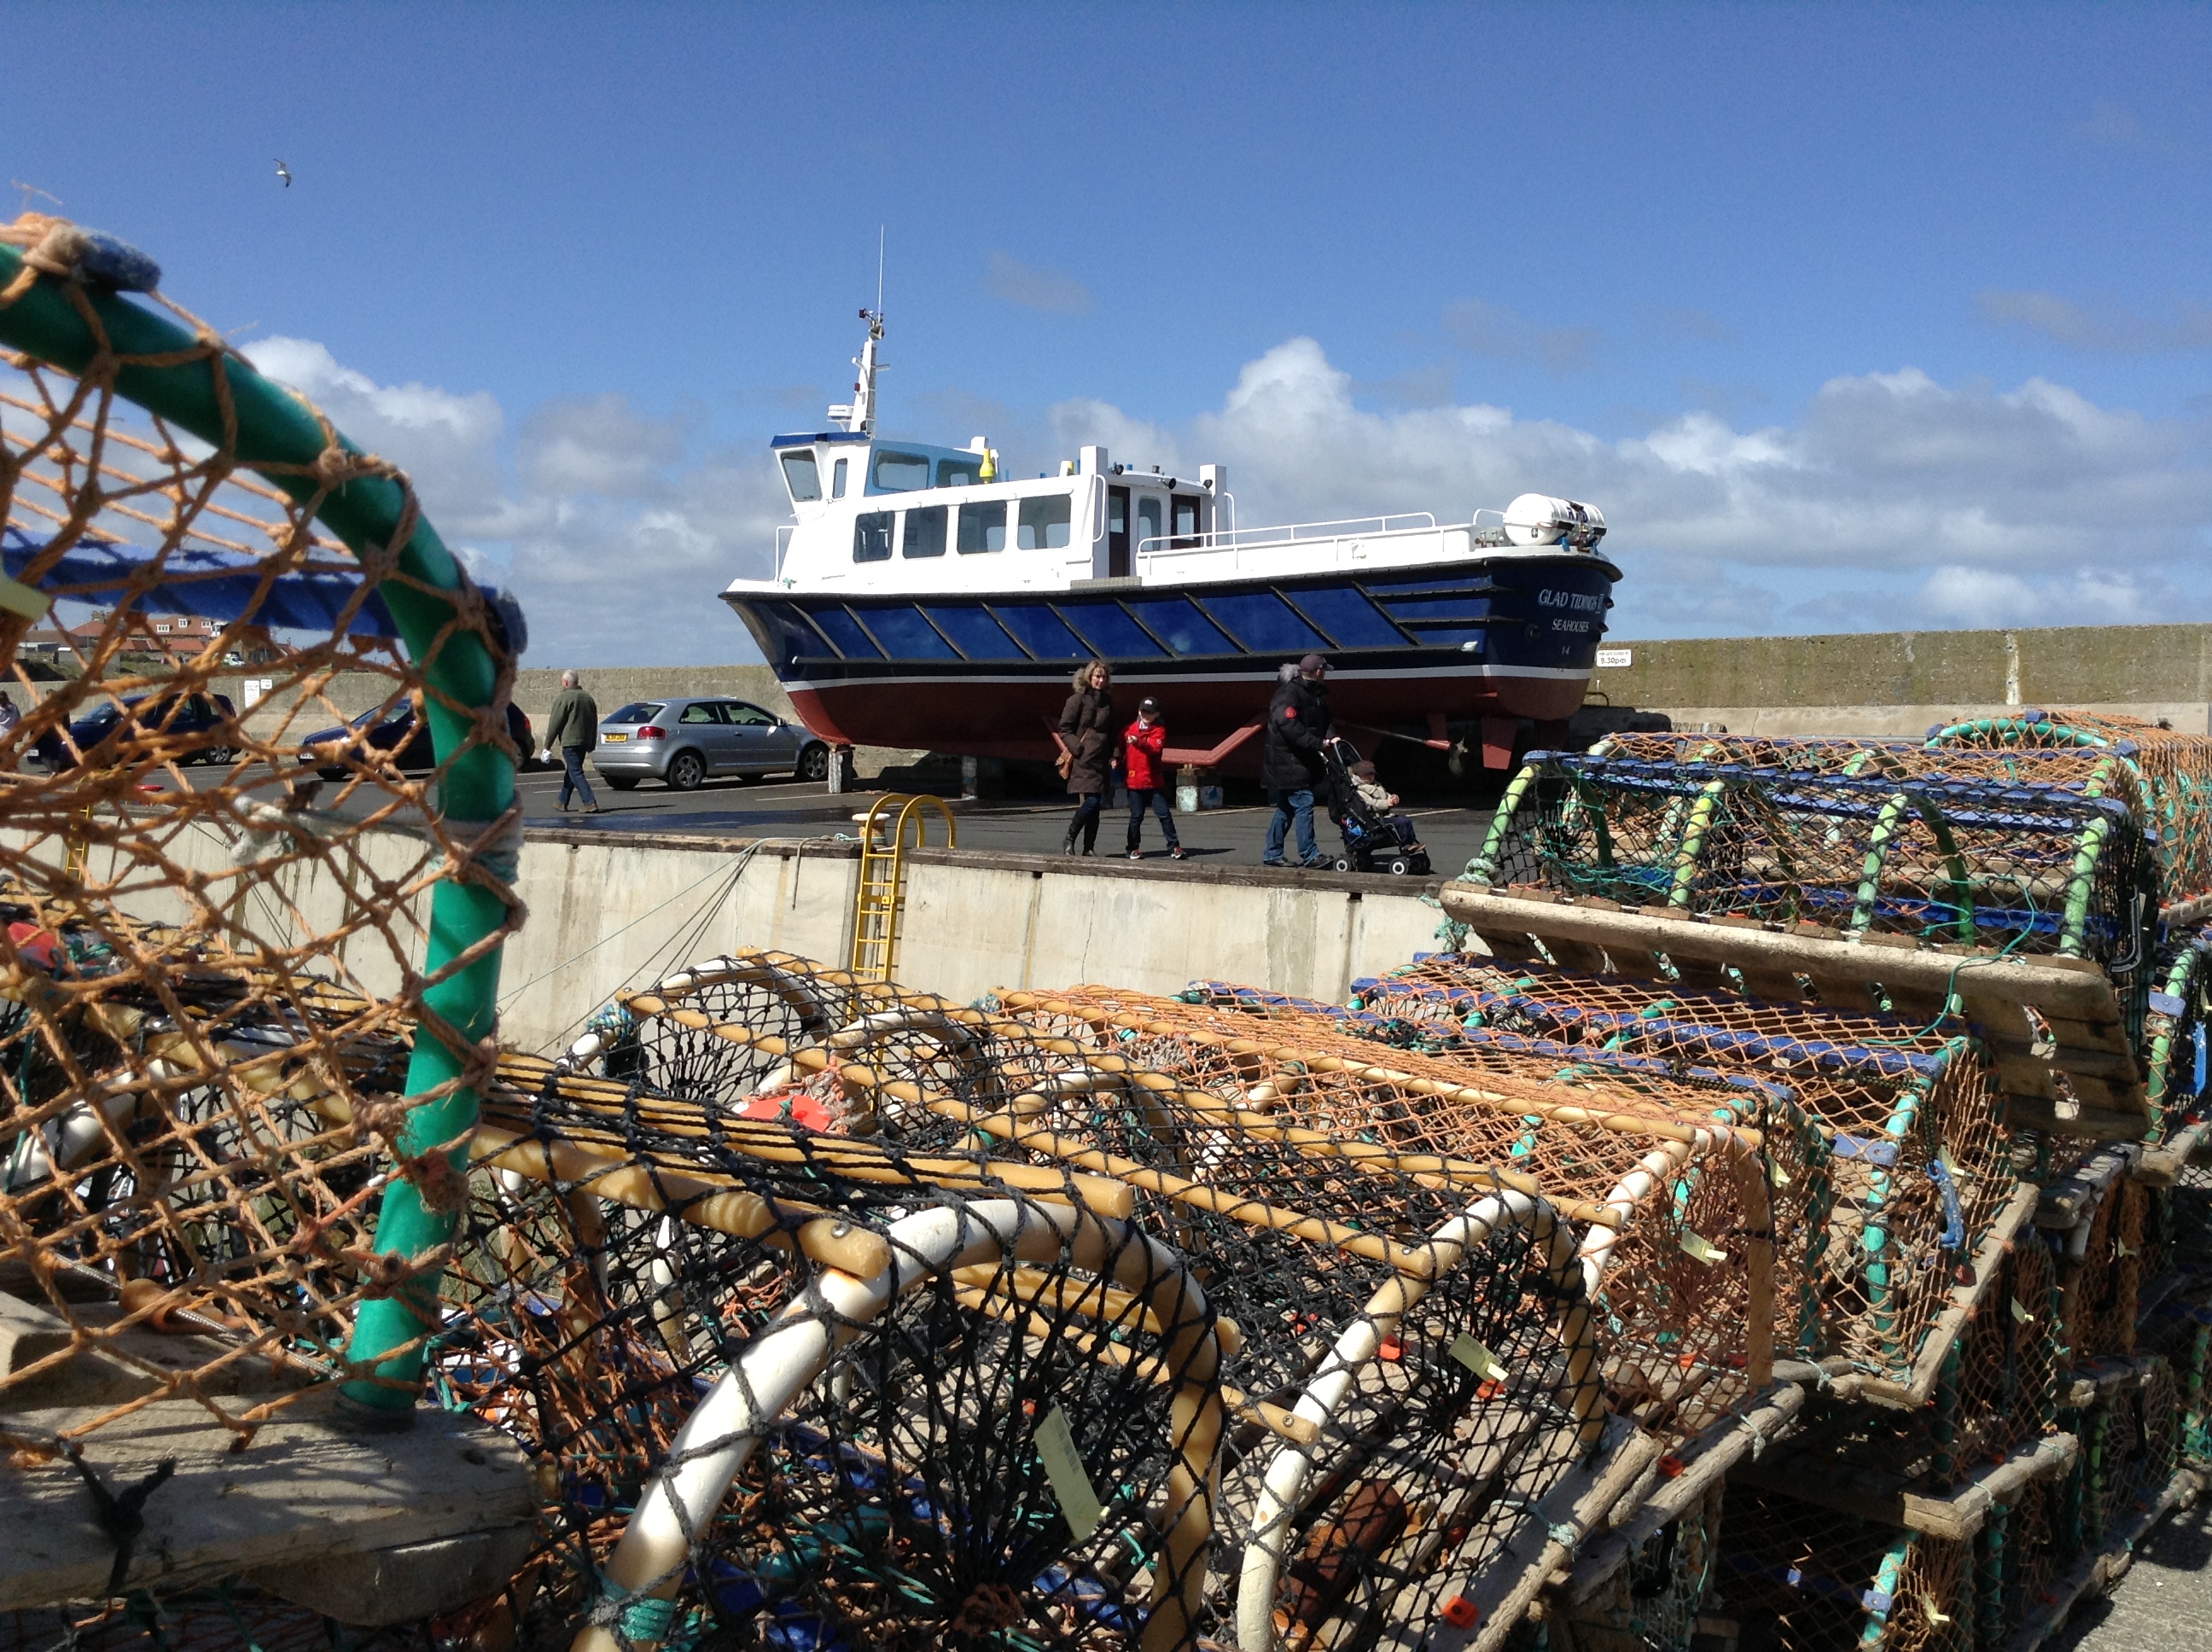 File:Lobster pots Seahouses - panoramio.jpg - Wikimedia Commons